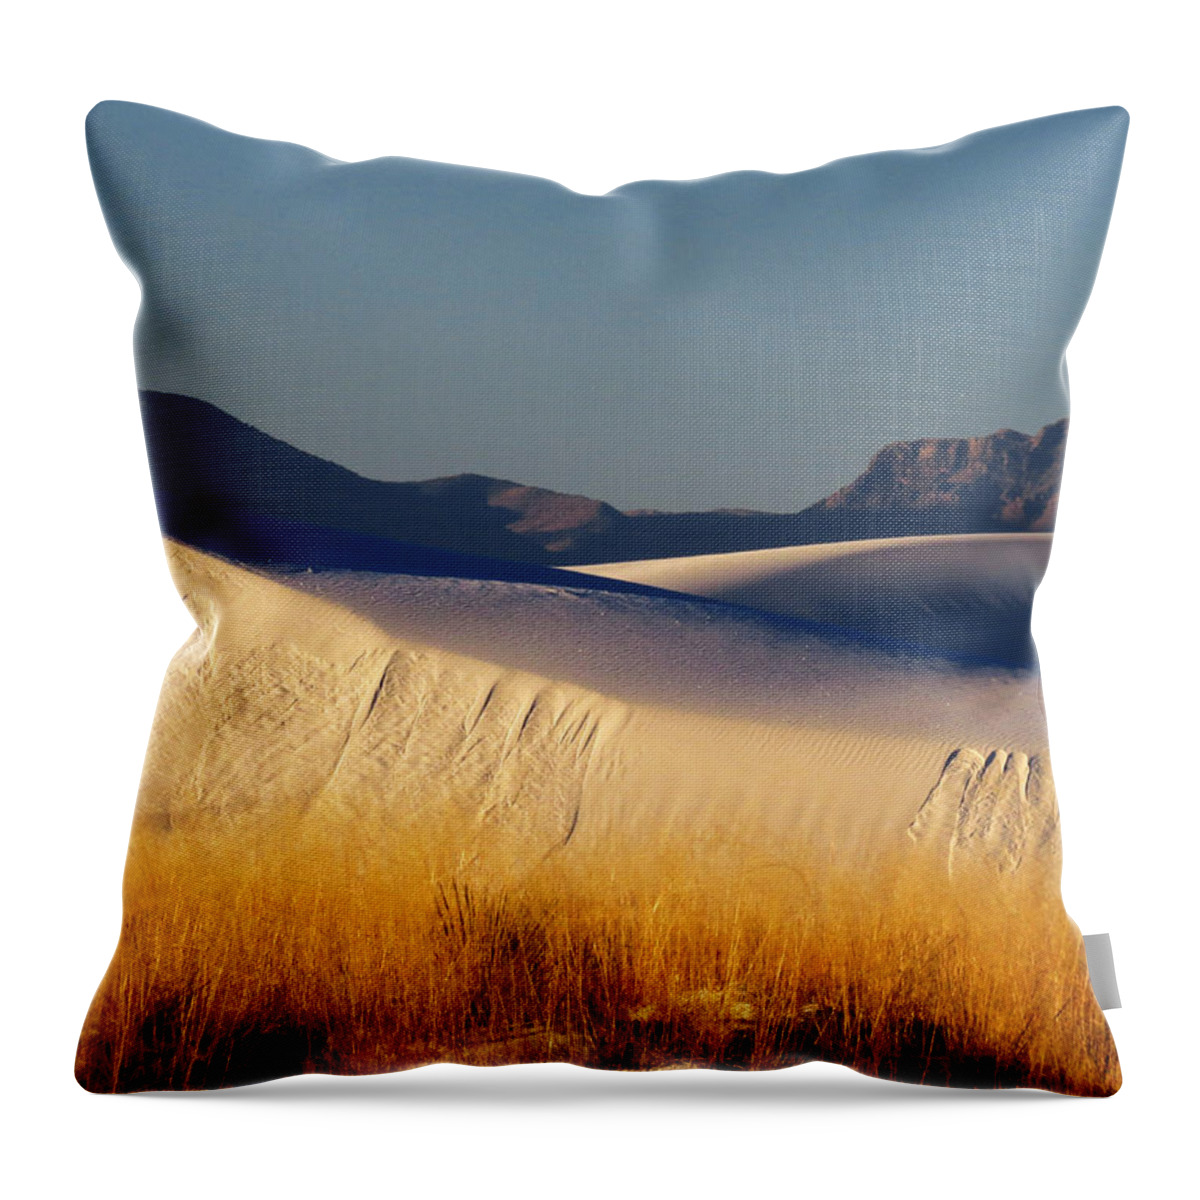 White Sands National Monument Throw Pillow featuring the photograph White Sands Dawn #81 by Cindy McIntyre